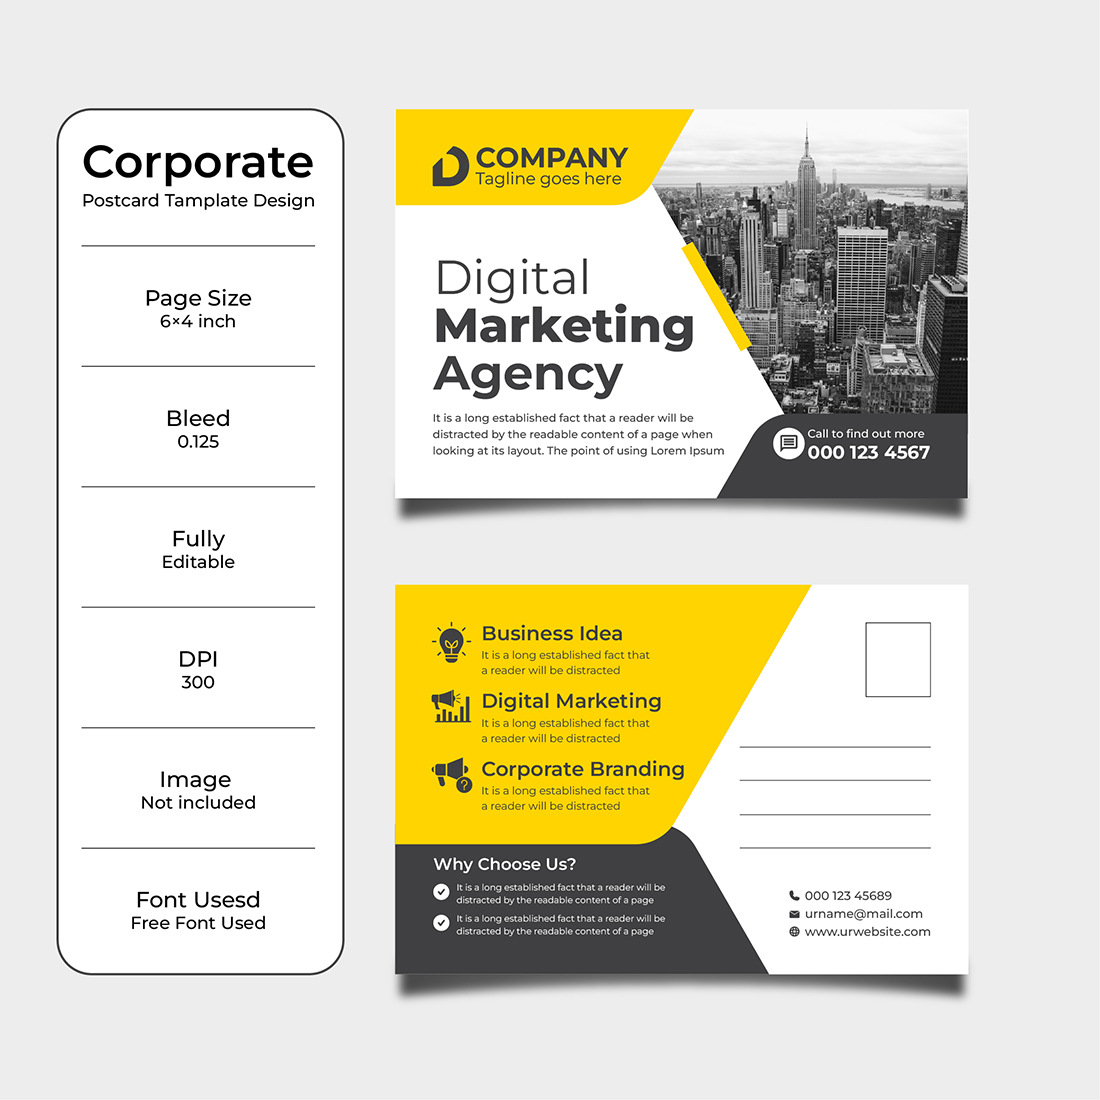 Set of two business cards with a yellow and black design.